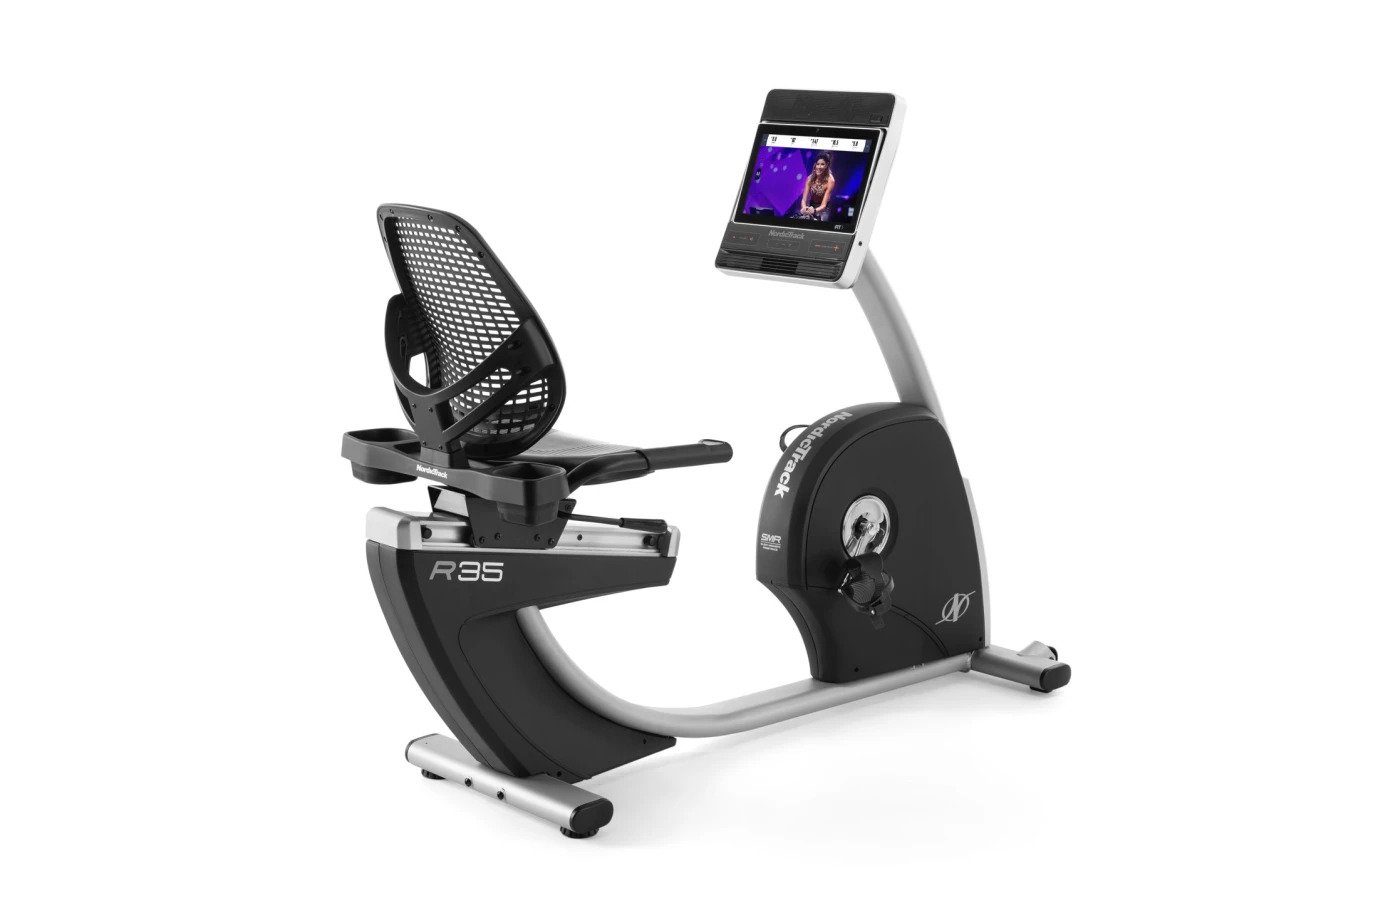 NordicTrack Commercial R35 Recumbent Bike with large touch screen console and iFit technology